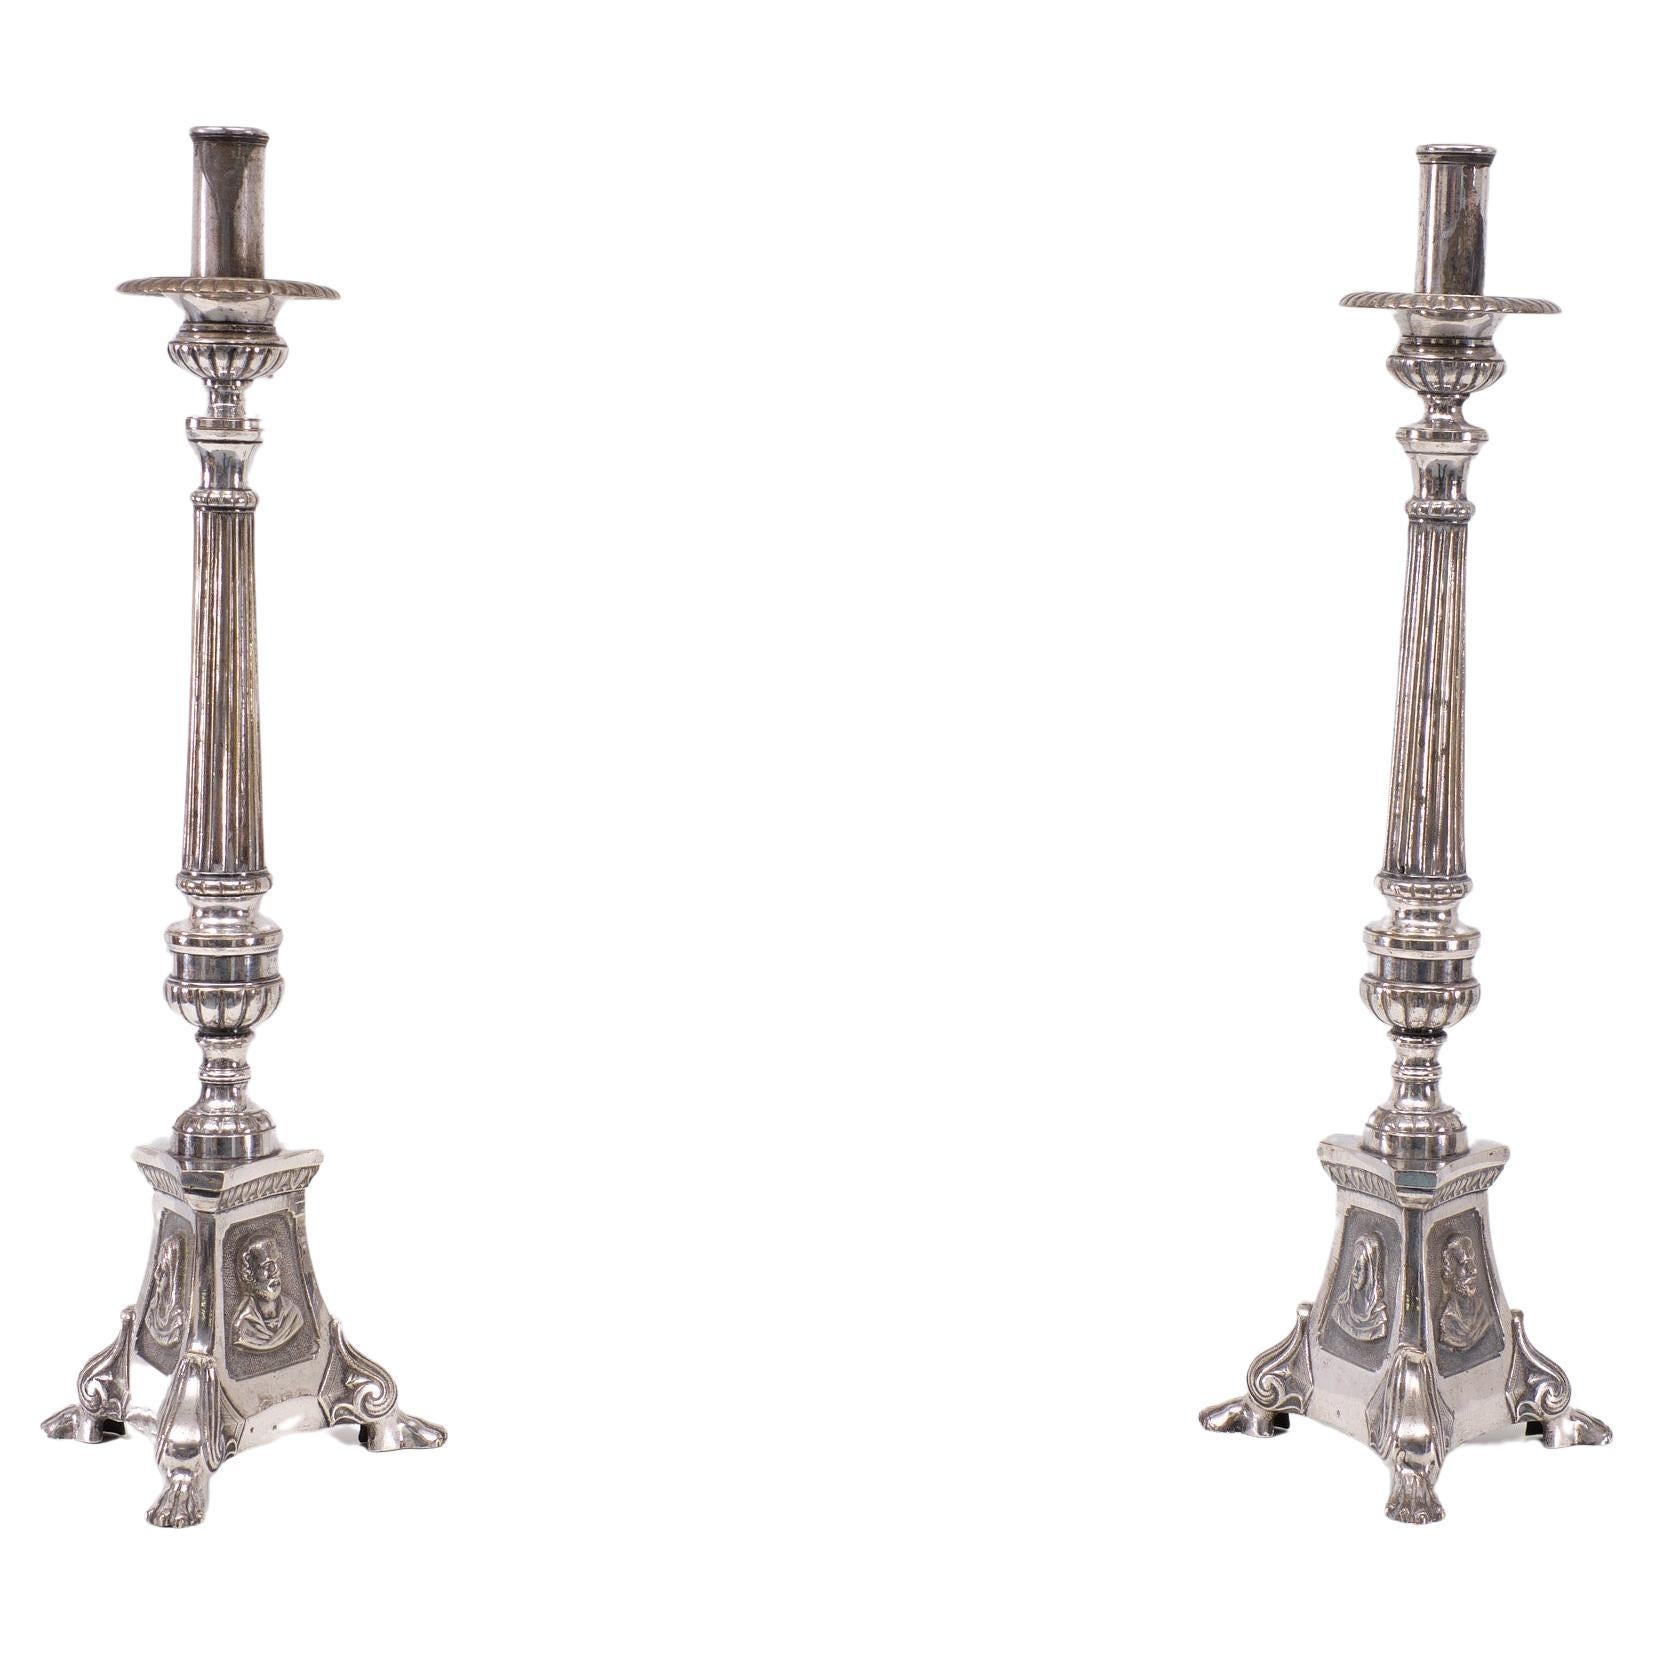 Antique Silver plated France church candle sticks  1850s 